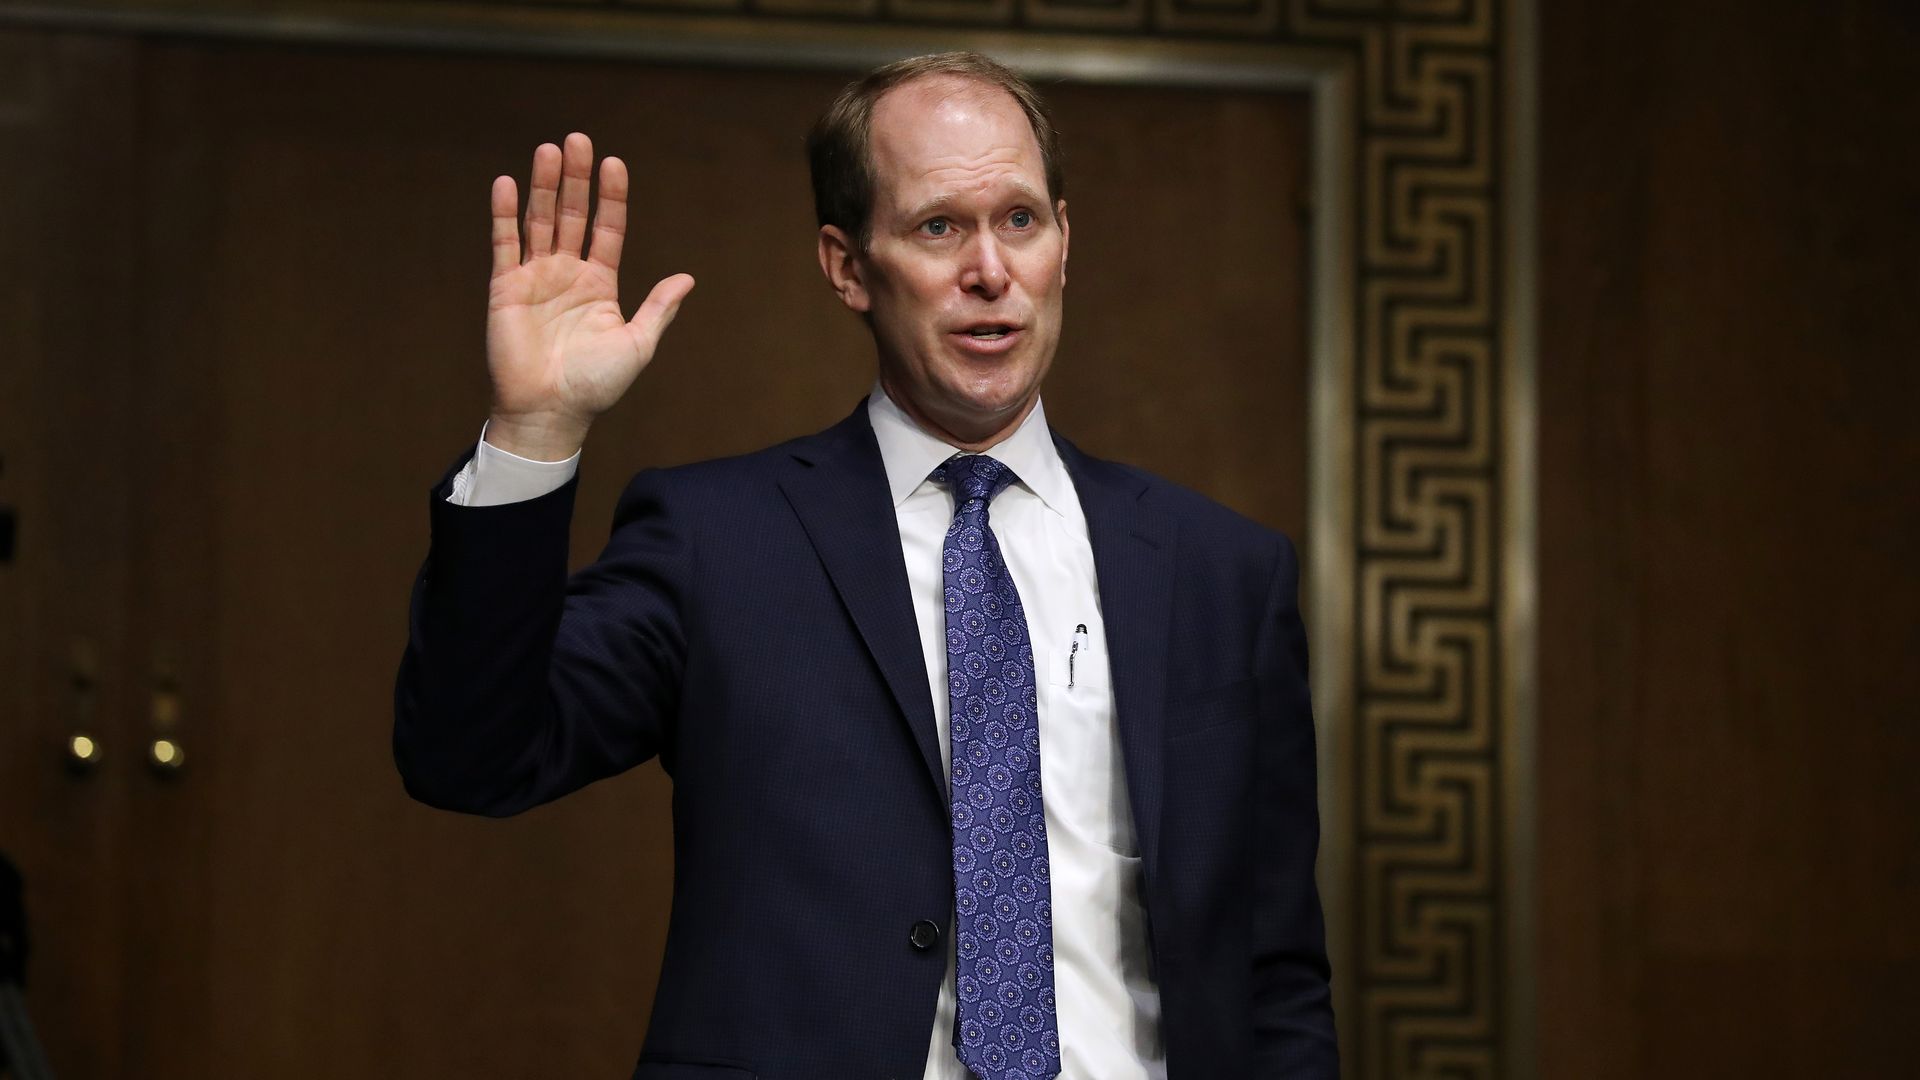 U.S. Attorney for the Northern District of Indiana Thomas Kirsch II is sworn in during his confirmation hearing before the Senate Judiciary Committee